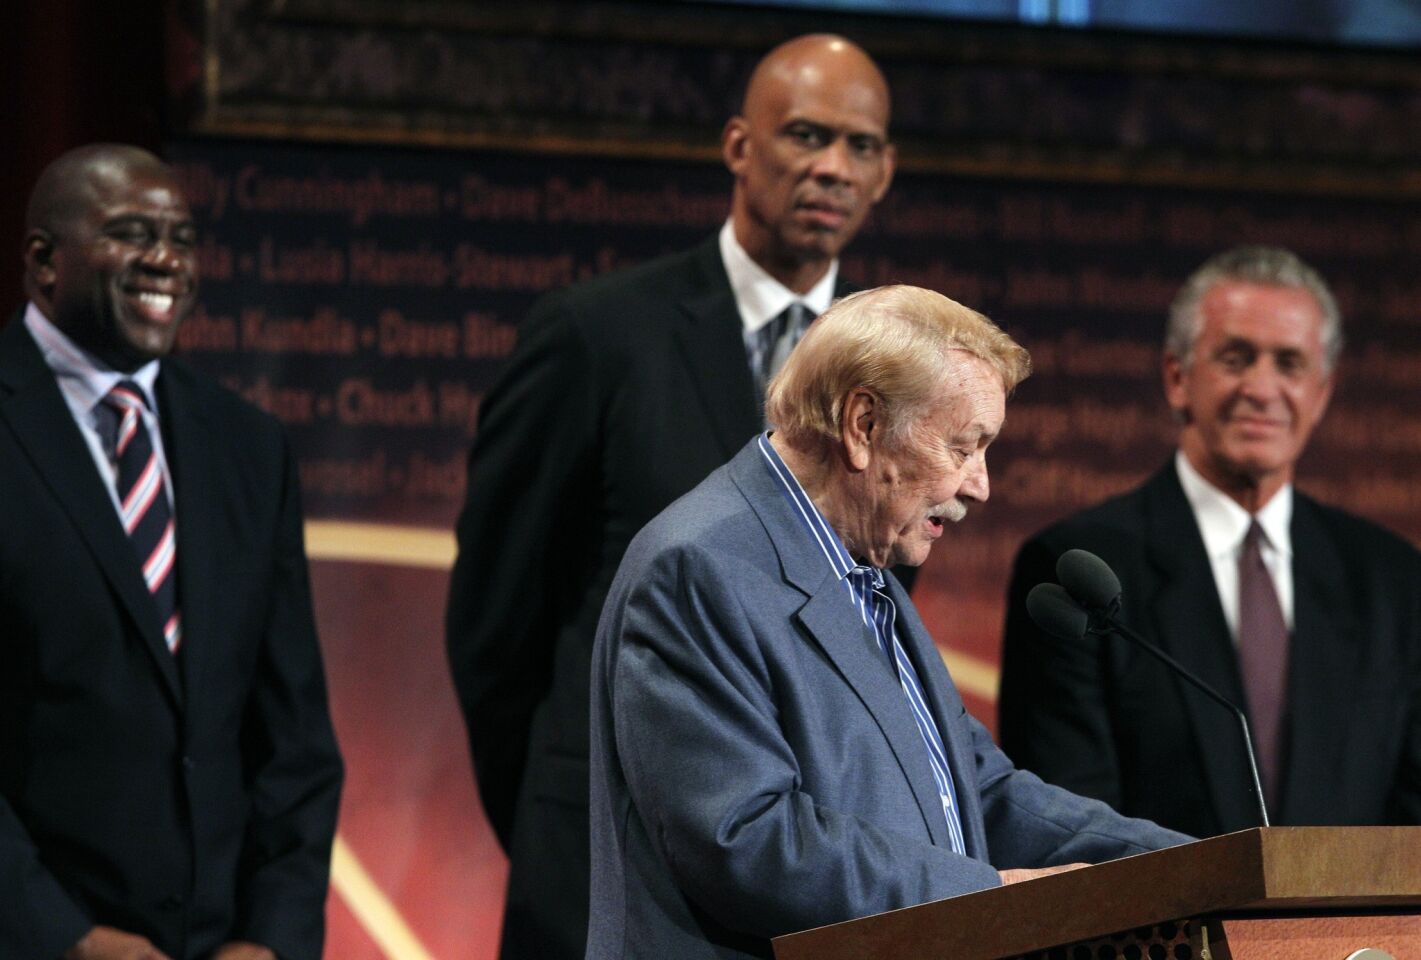 Jerry Buss, with Lakers legends Magic Johnson, Kareem Abdul-Jabbar and Pat Riley at his side, speaks during his Pro Basketball Hall of Fame enshrinement in Springfield, Mass.